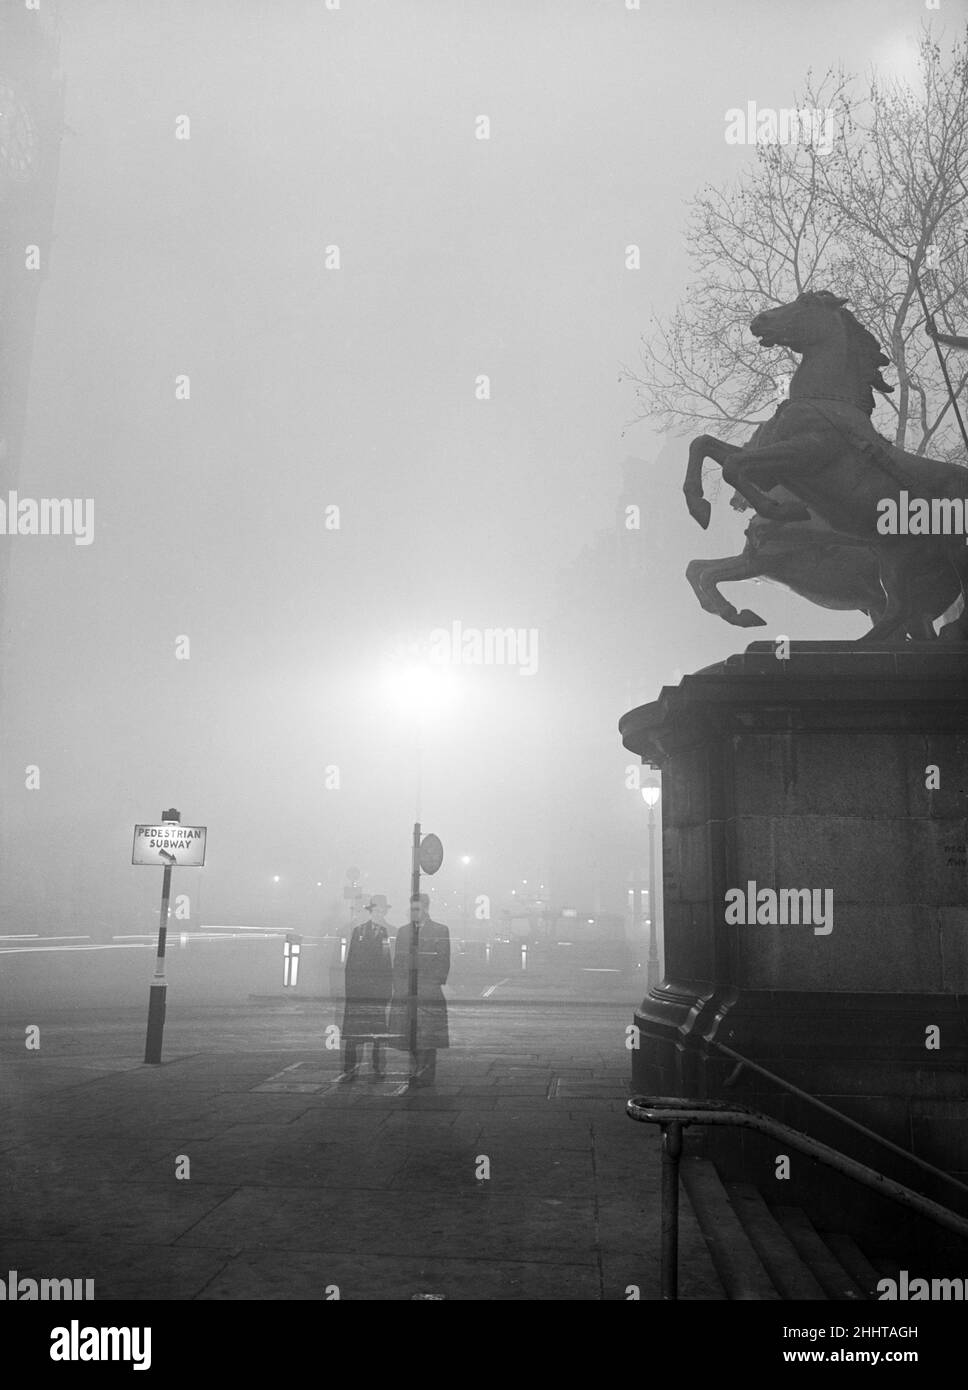 The great smog blanket - mixture of smoke and fog that is said to be costing £2,000,000 a day - thickened last night to what was described as the blackout of London for twenty-five years, possibly the worst ever. Pictured, Boadicea statue at Westminster. 8th December 1952. Stock Photo